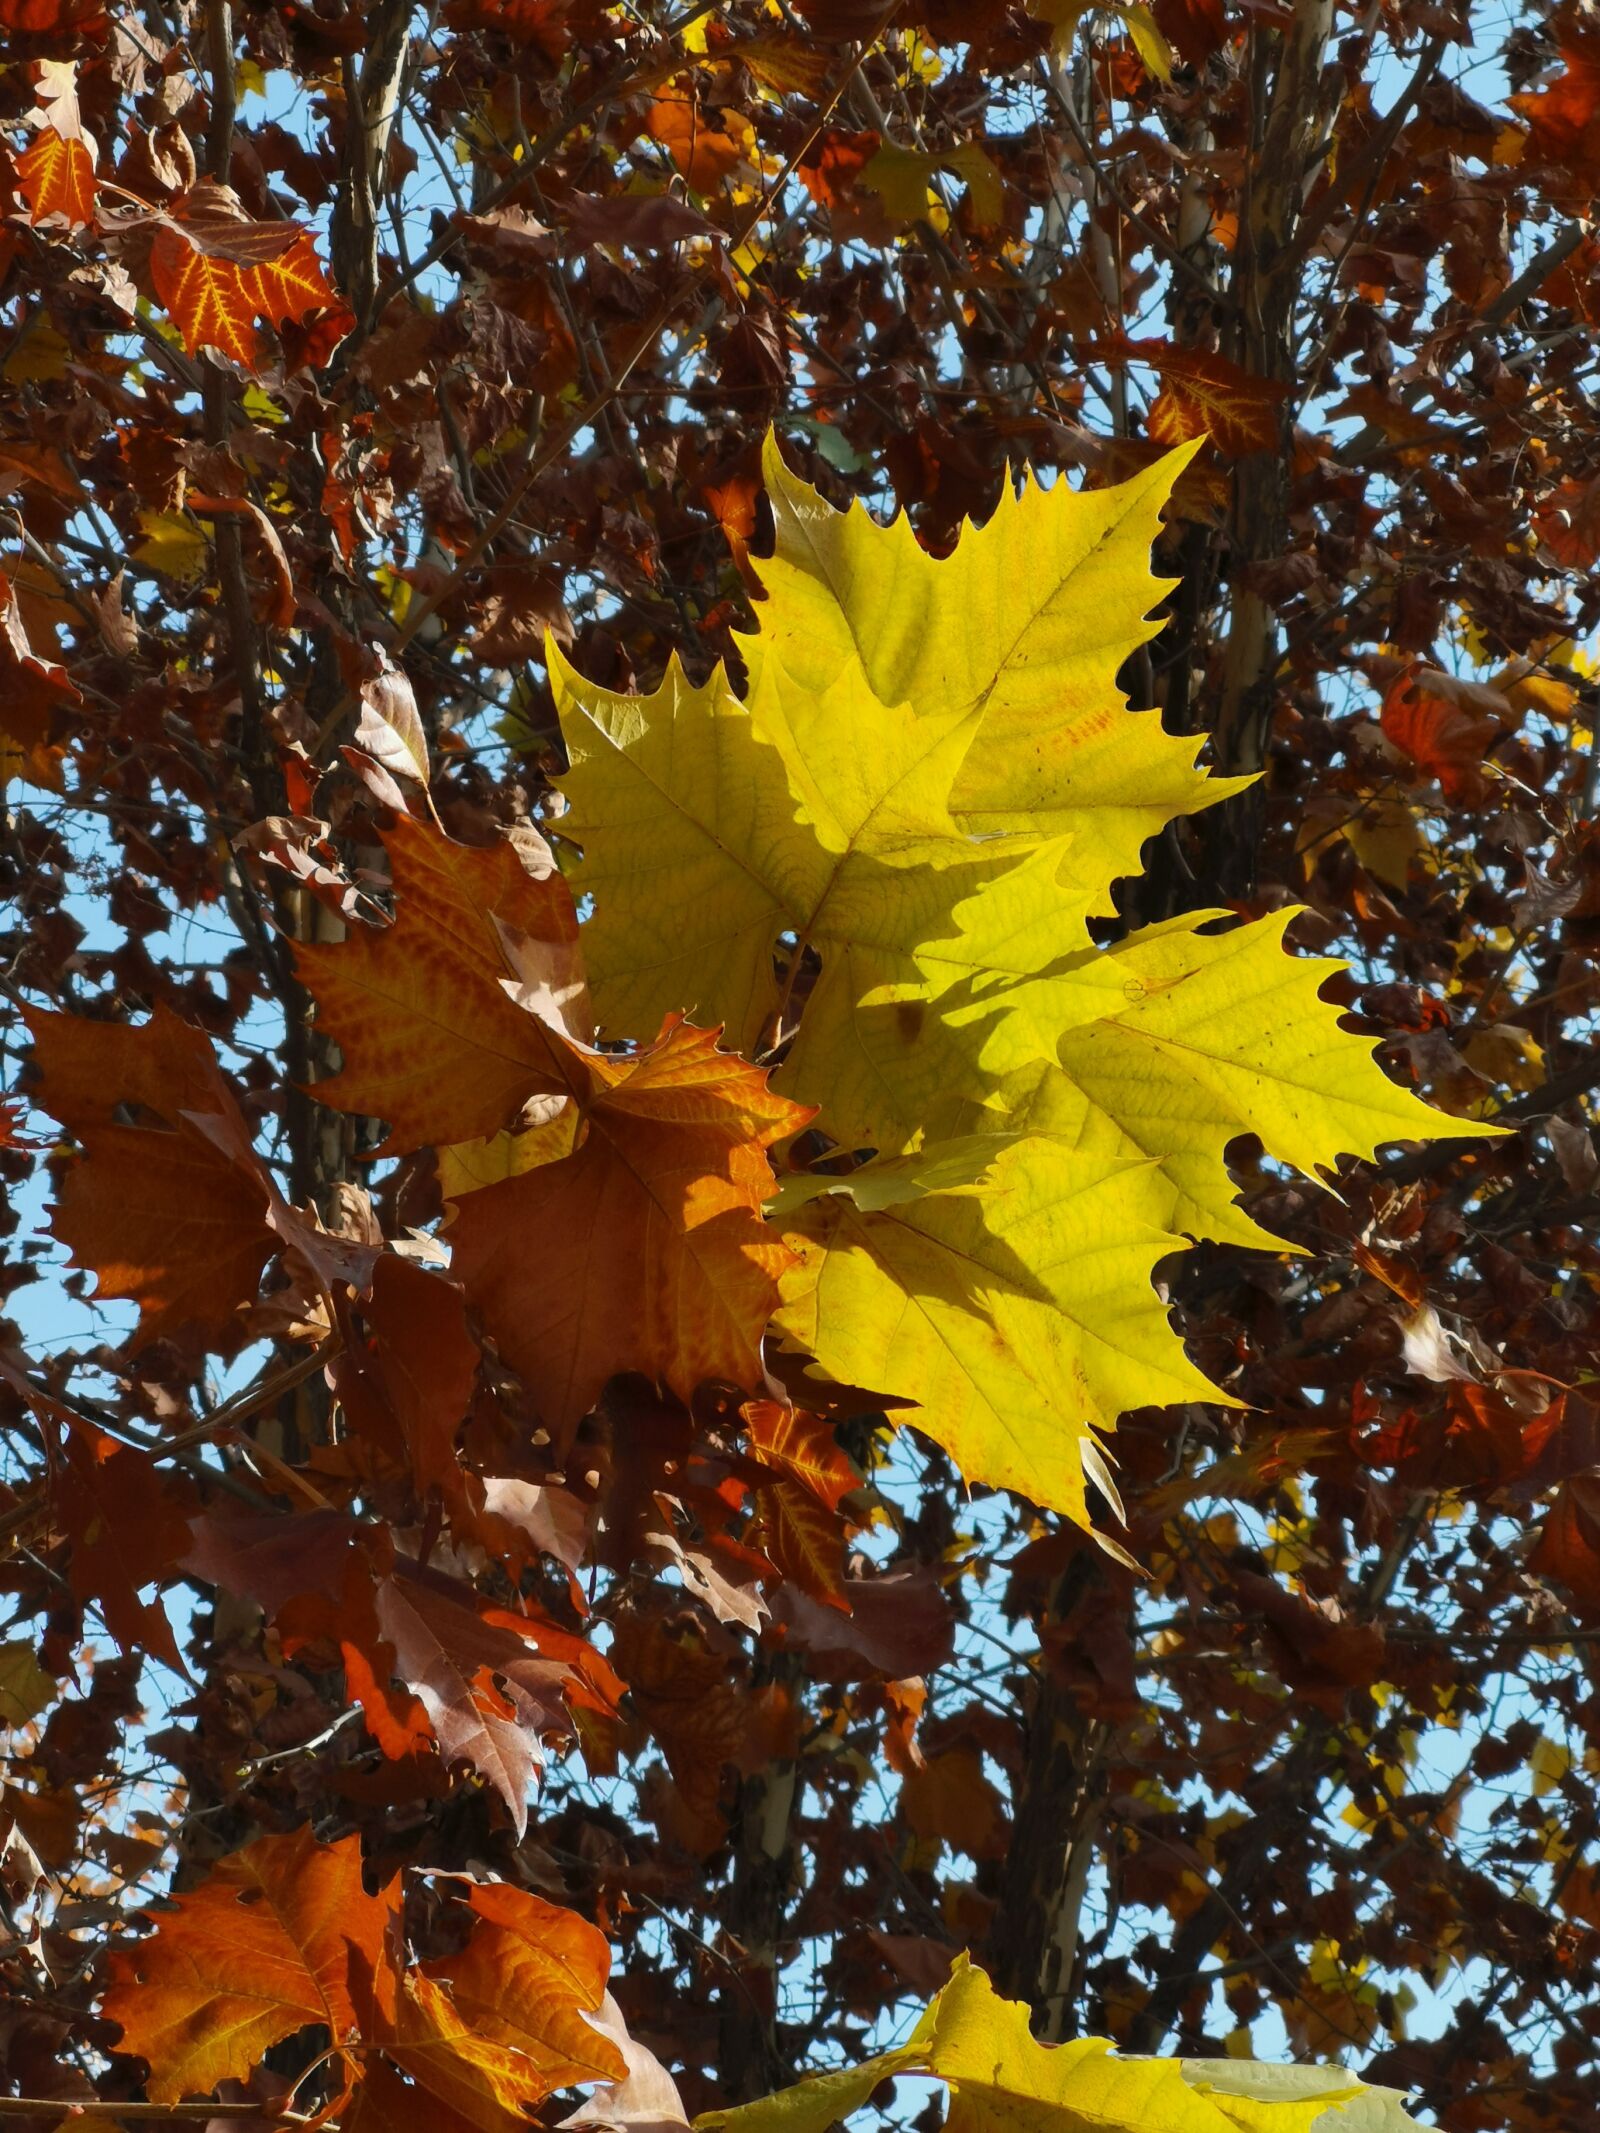 HUAWEI Mate 20 Pro sample photo. The leaves, leaf, the photography